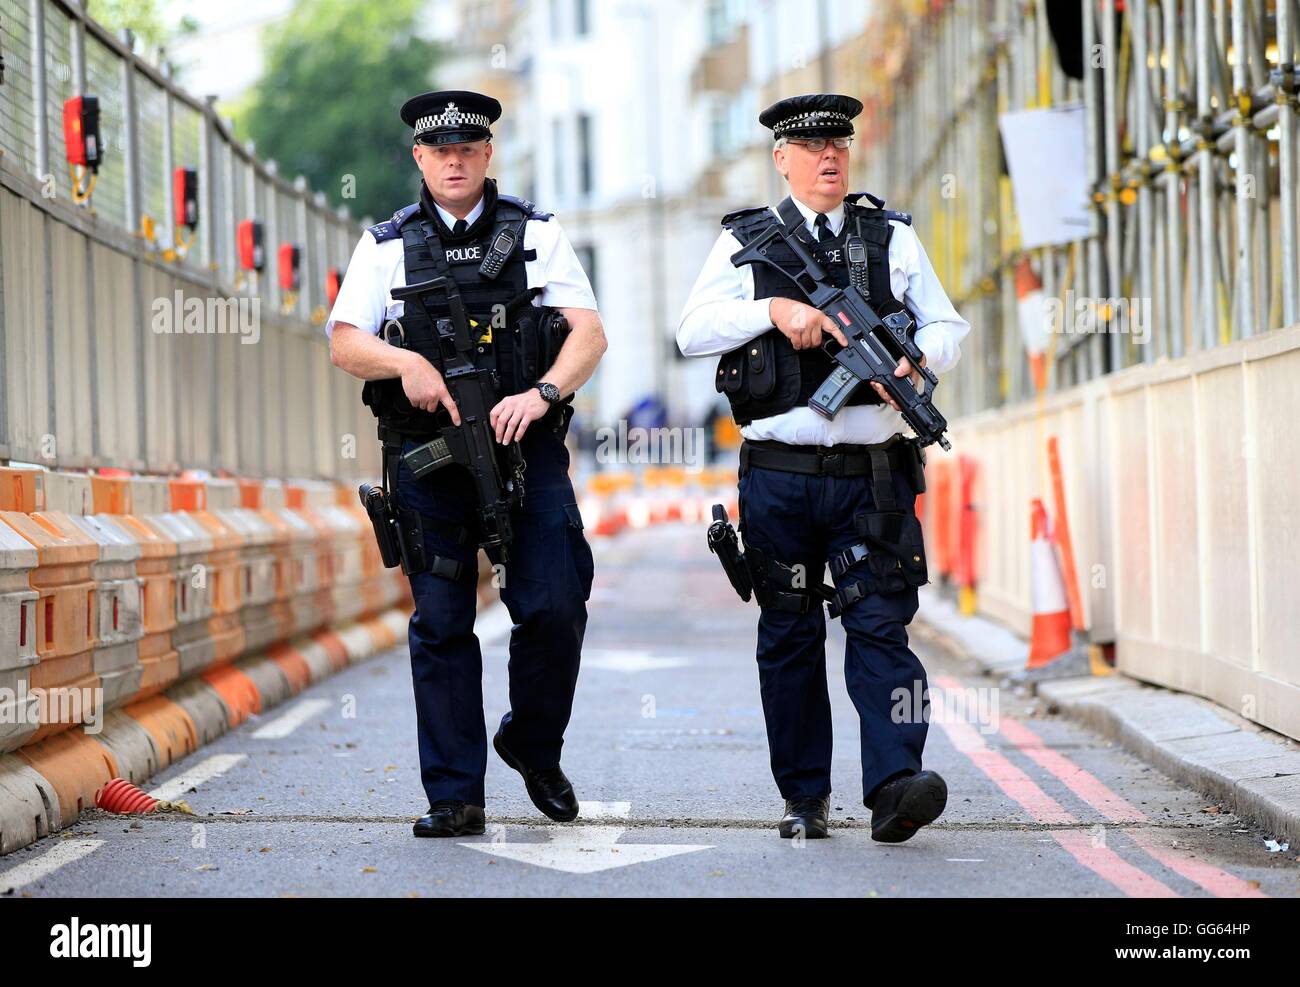 Armed police patrol as part of a security operation near the junction of Knightsbridge and Hyde Park Corner, London, as Scotland Yard announced that the first of 600 additional armed officers were trained and operationally ready, and unveiled plans to put more marksmen on public patrol. Stock Photo